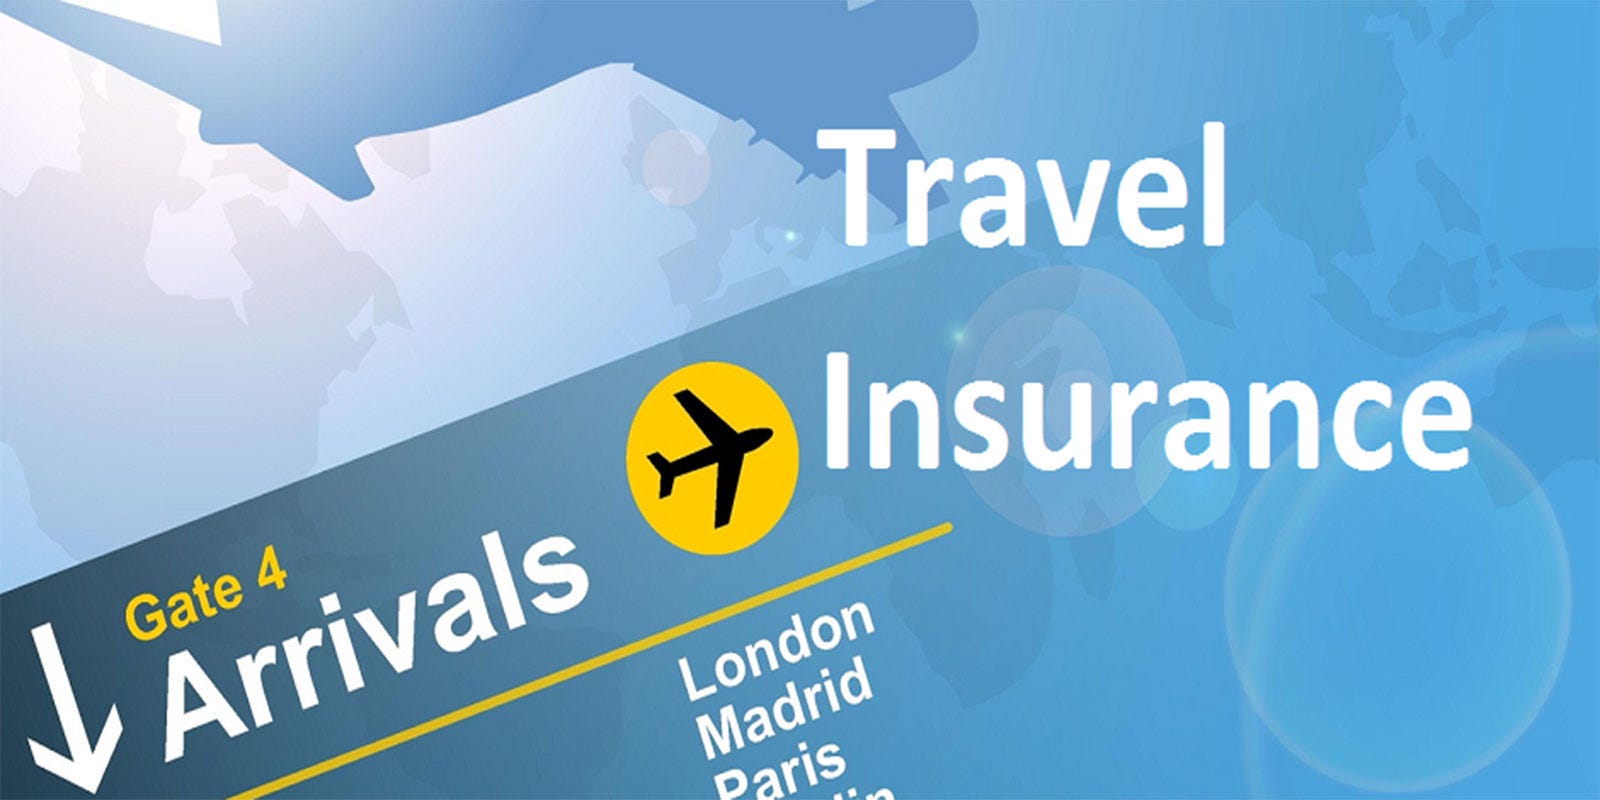 5 Reasons Why Travel Insurance is Important